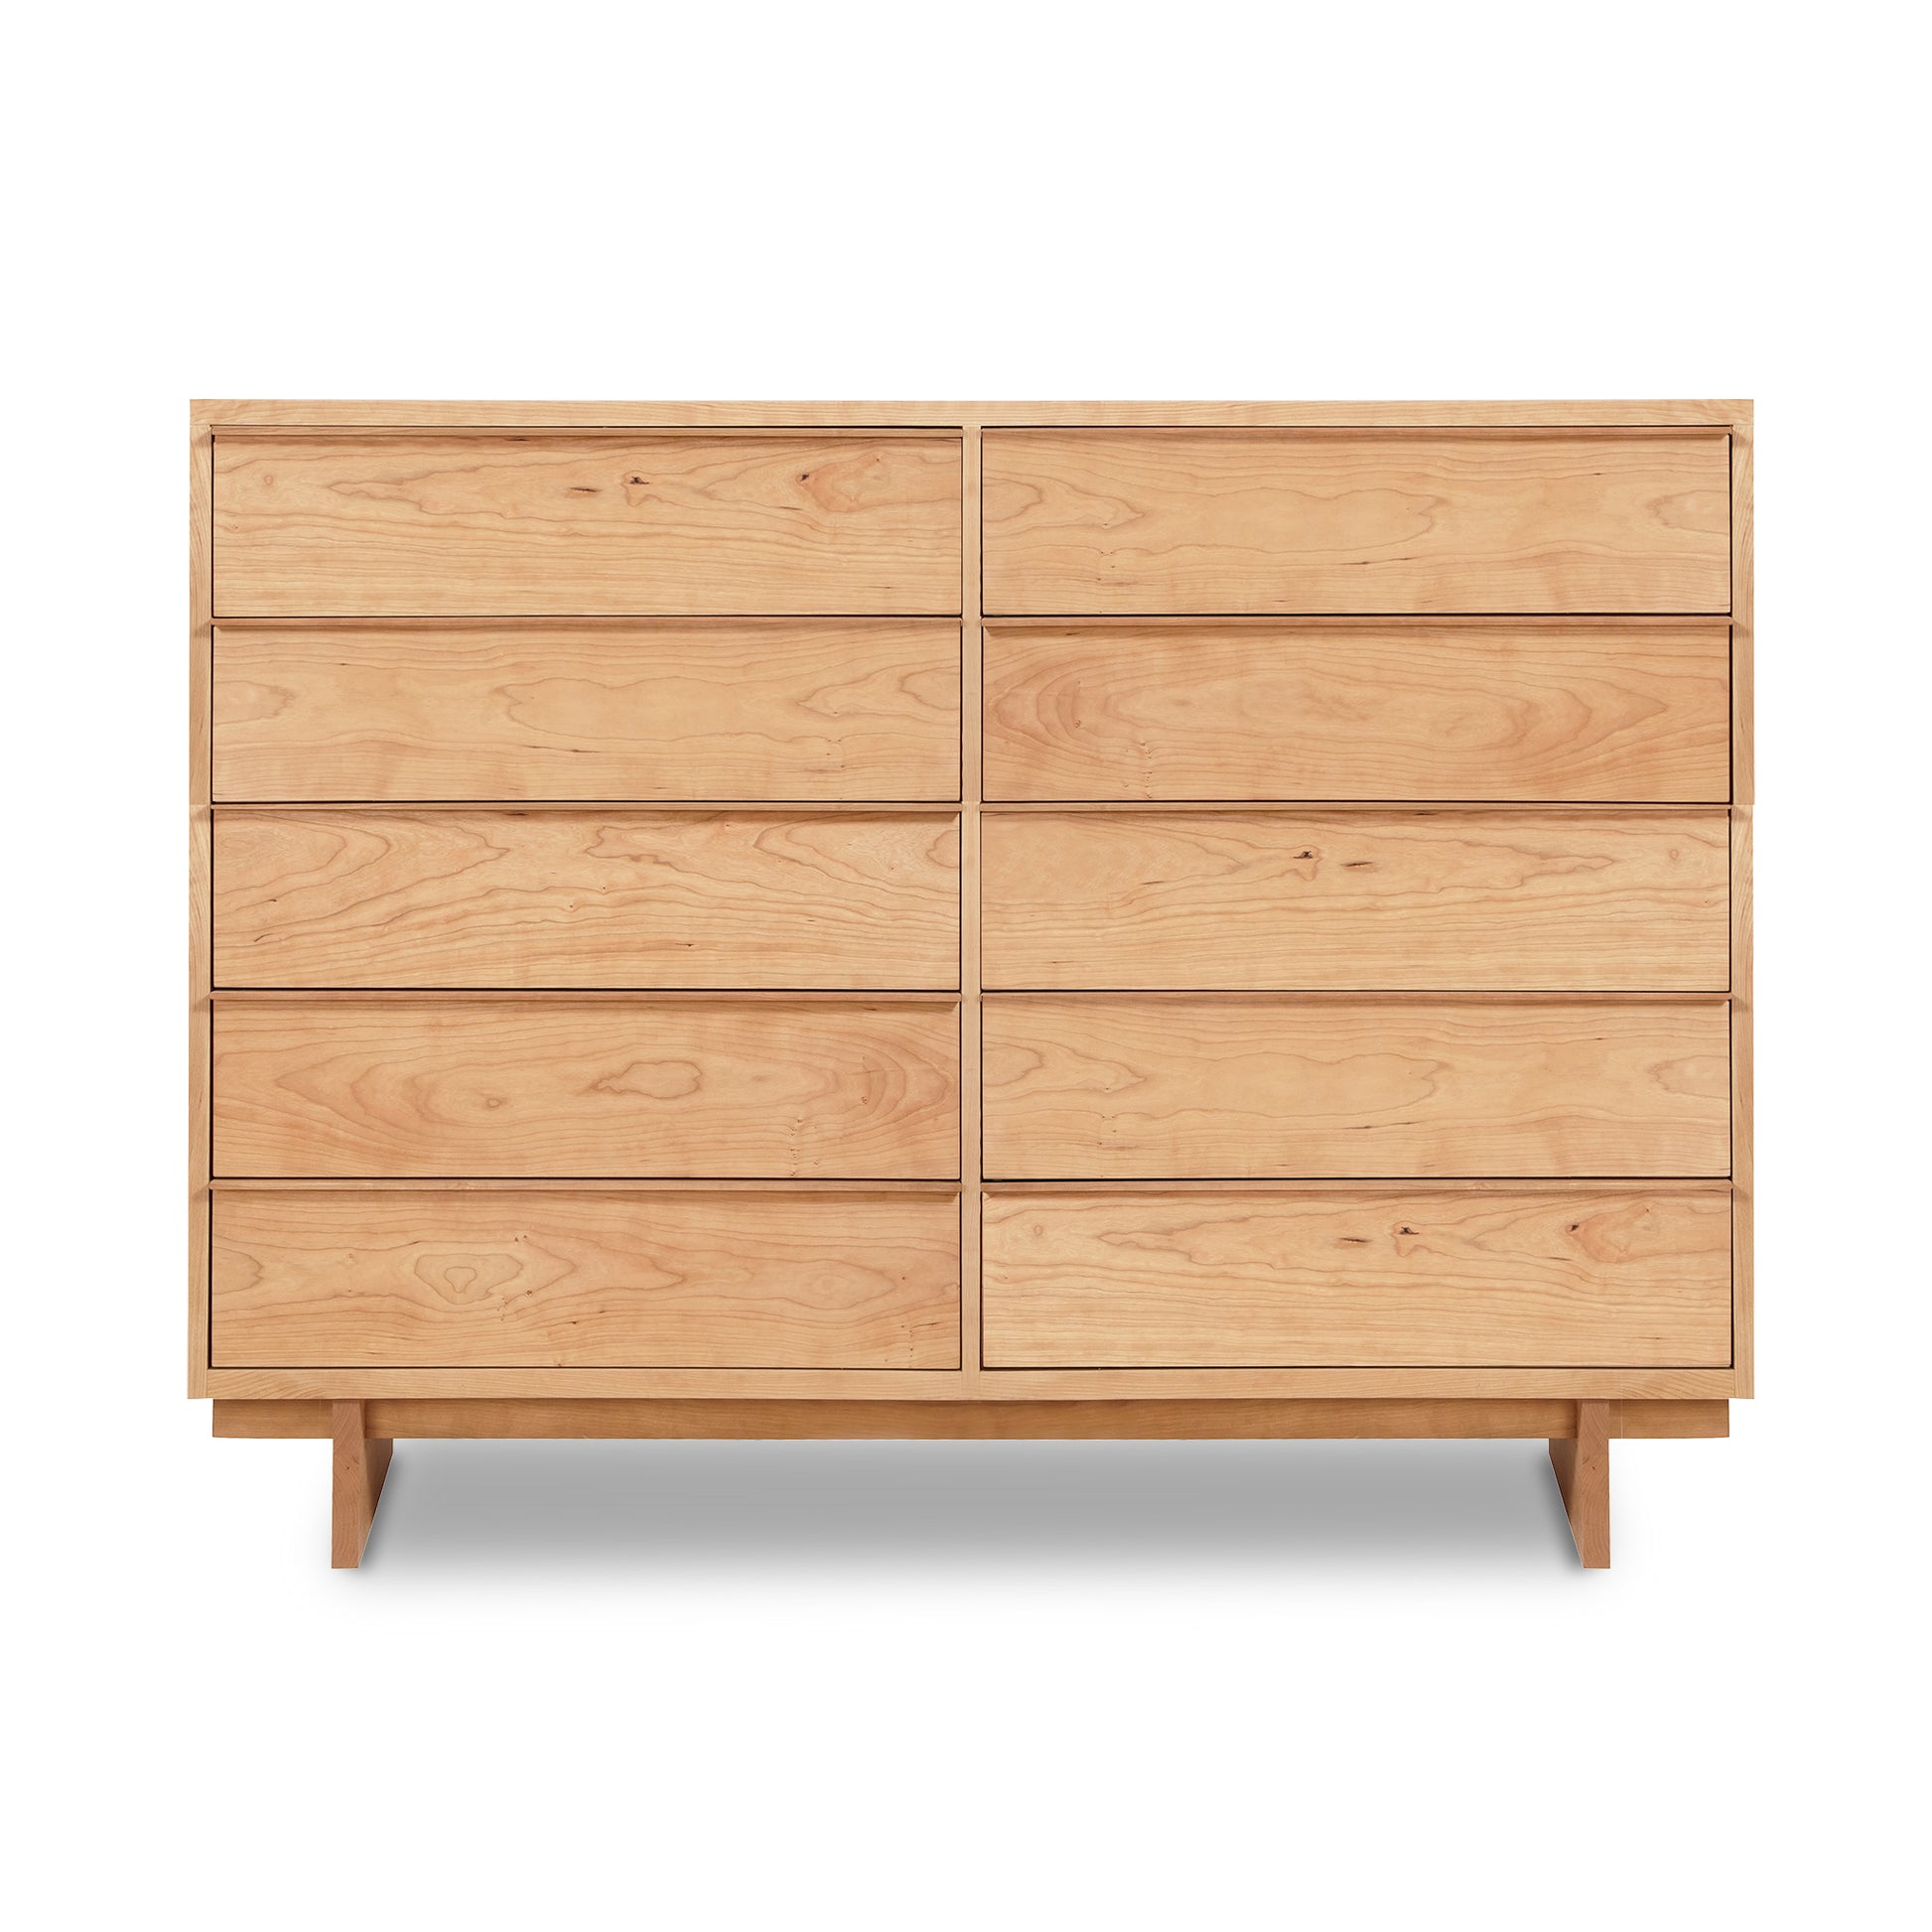 A Kipling 10-Drawer Dresser with six drawers and angled legs isolated on a white background, exemplifying Vermont Furniture Designs craftsmanship.